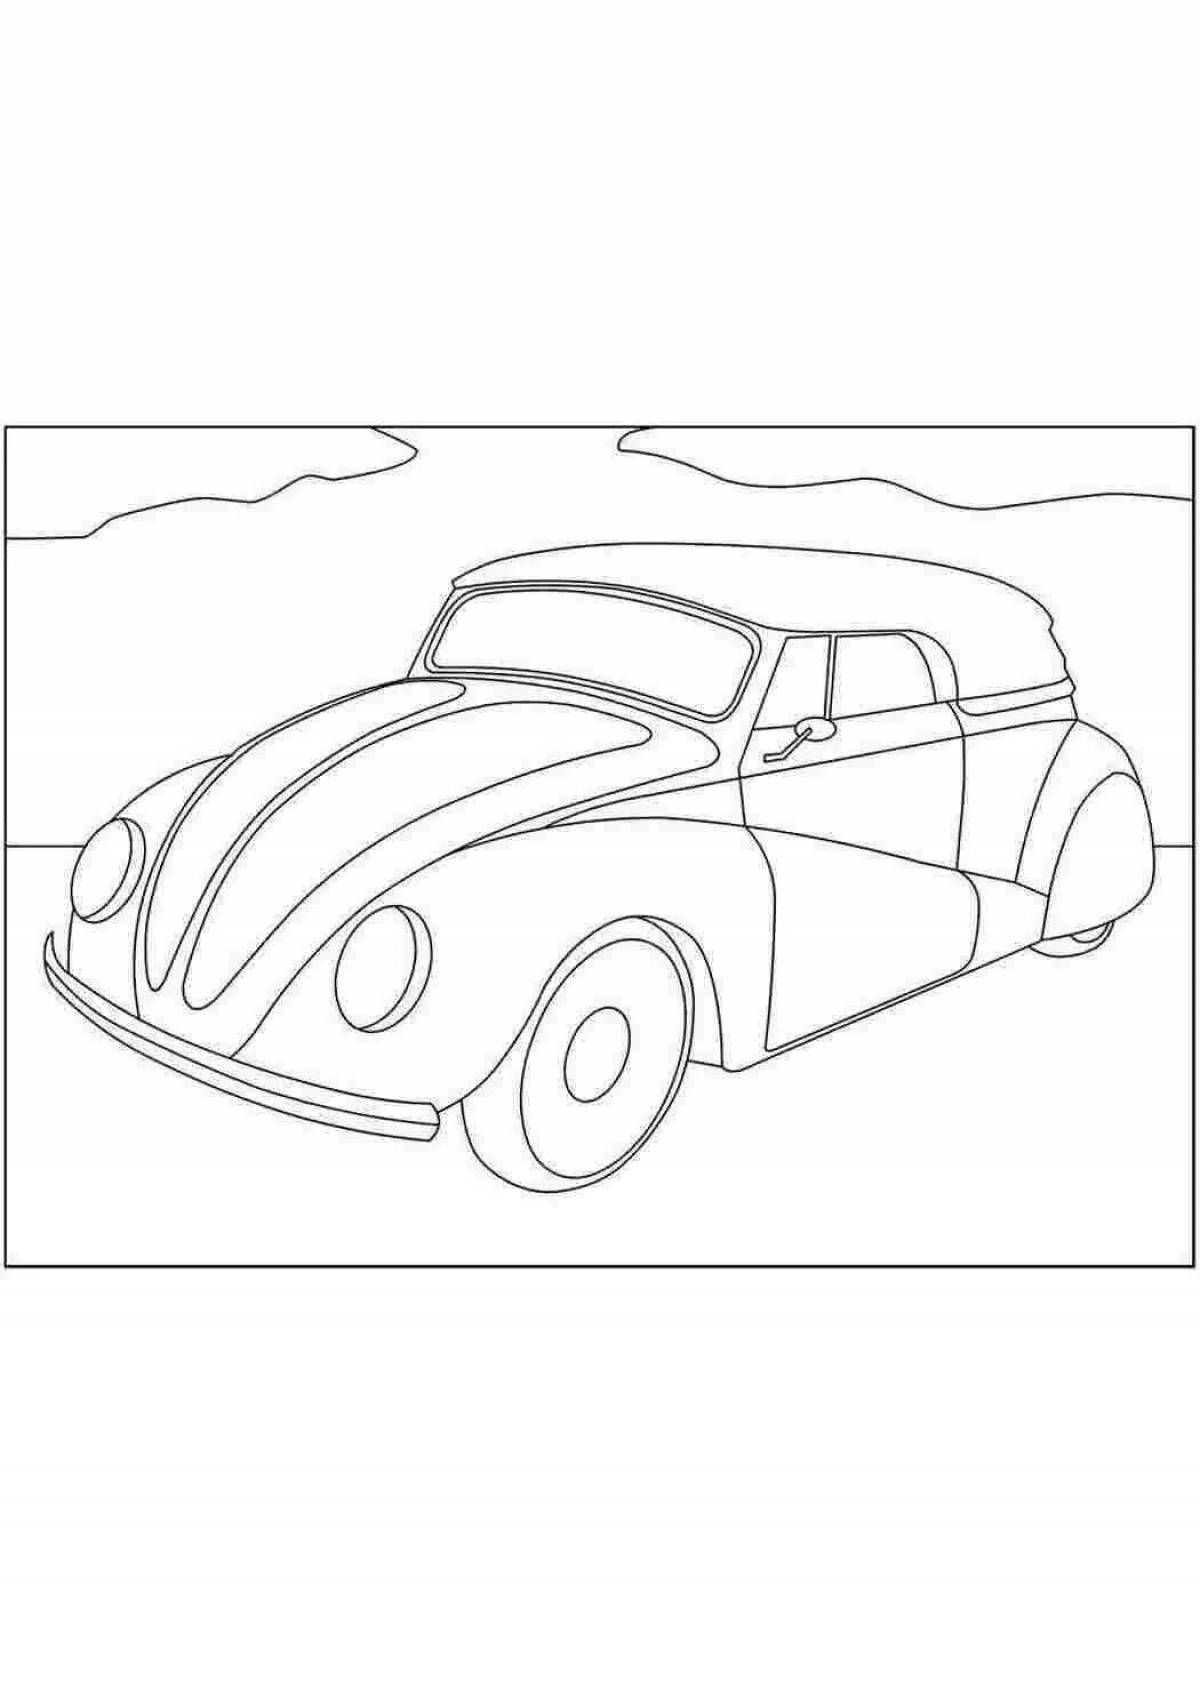 Coloring page gorgeous volkswagen car